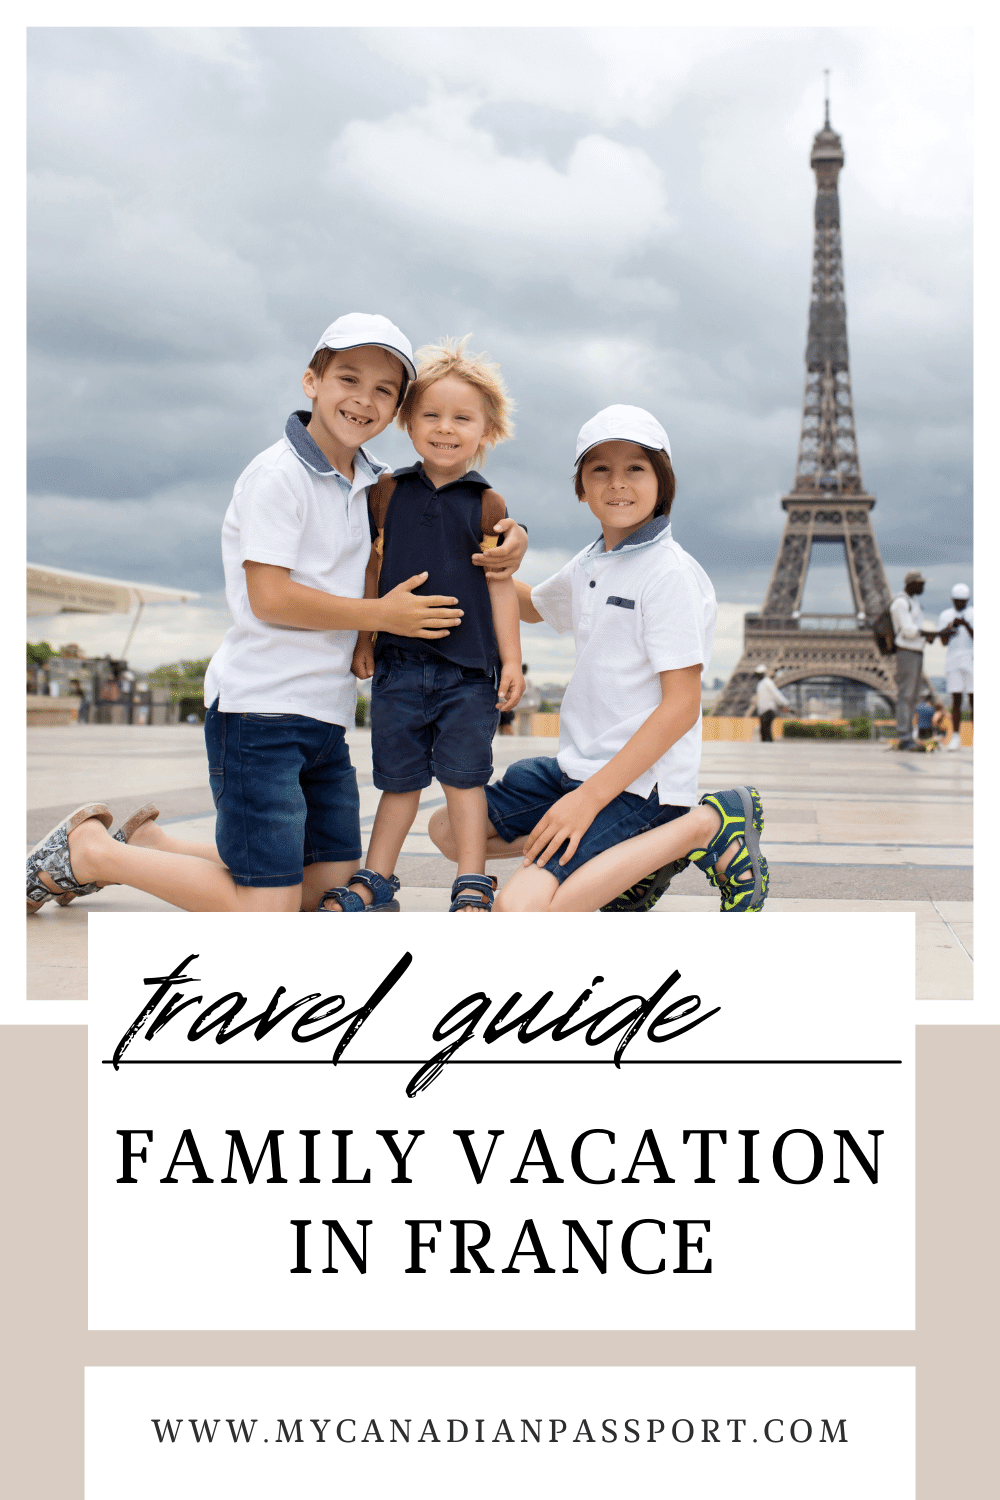 Creating Forever Memories in France with Kids - My Canadian Passport